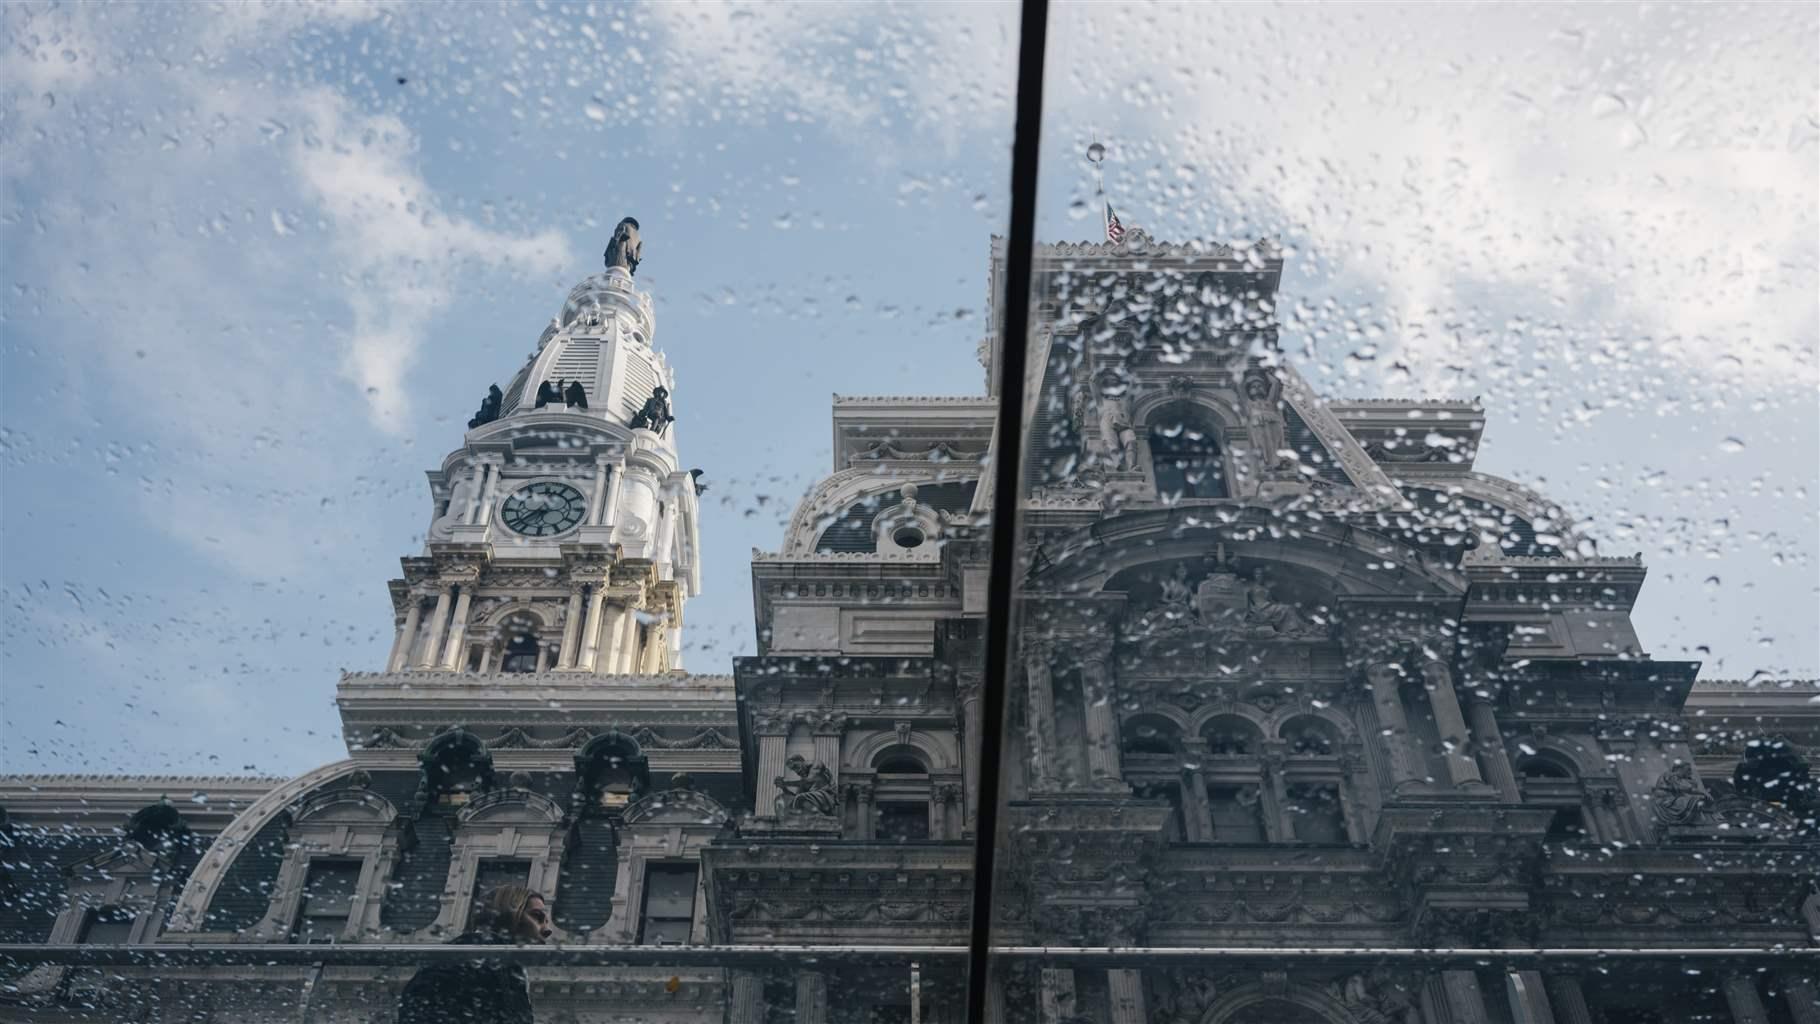 Philadelphia City Hall viewed from the glass roof of a subway entrance after the rain.